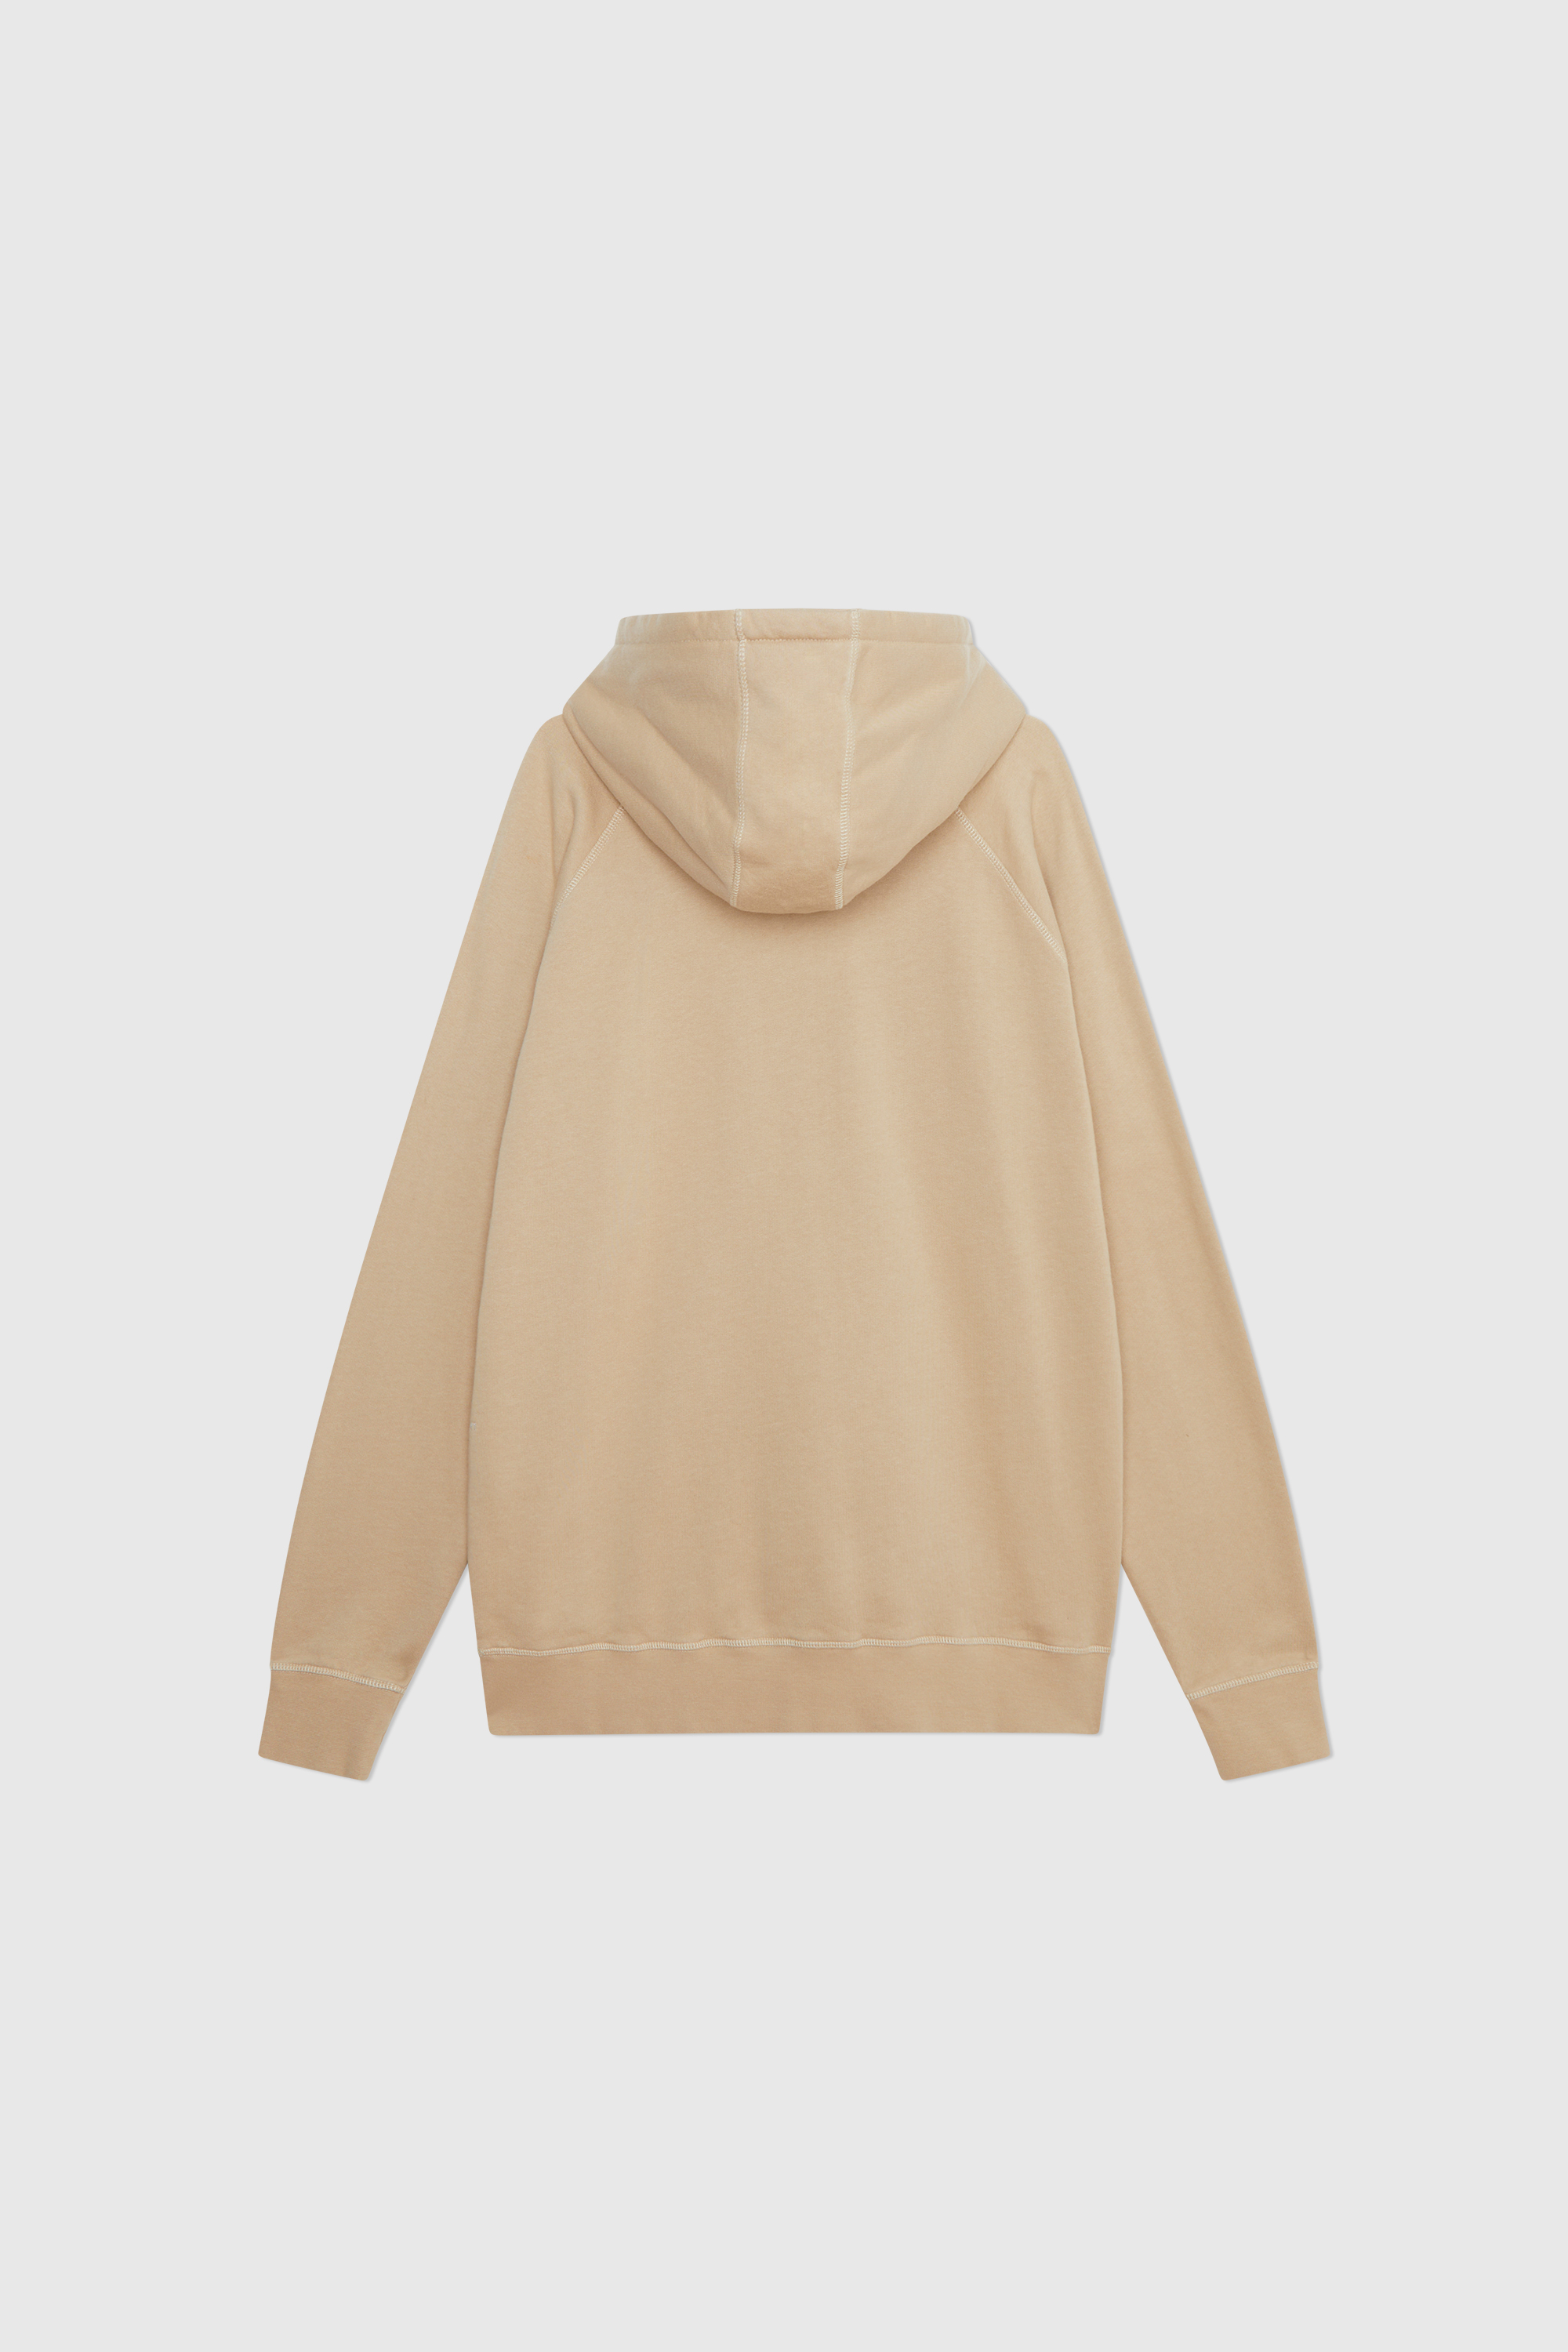 Pop Trading Company Arch Hooded Sweat Seasam | WoodWood.com